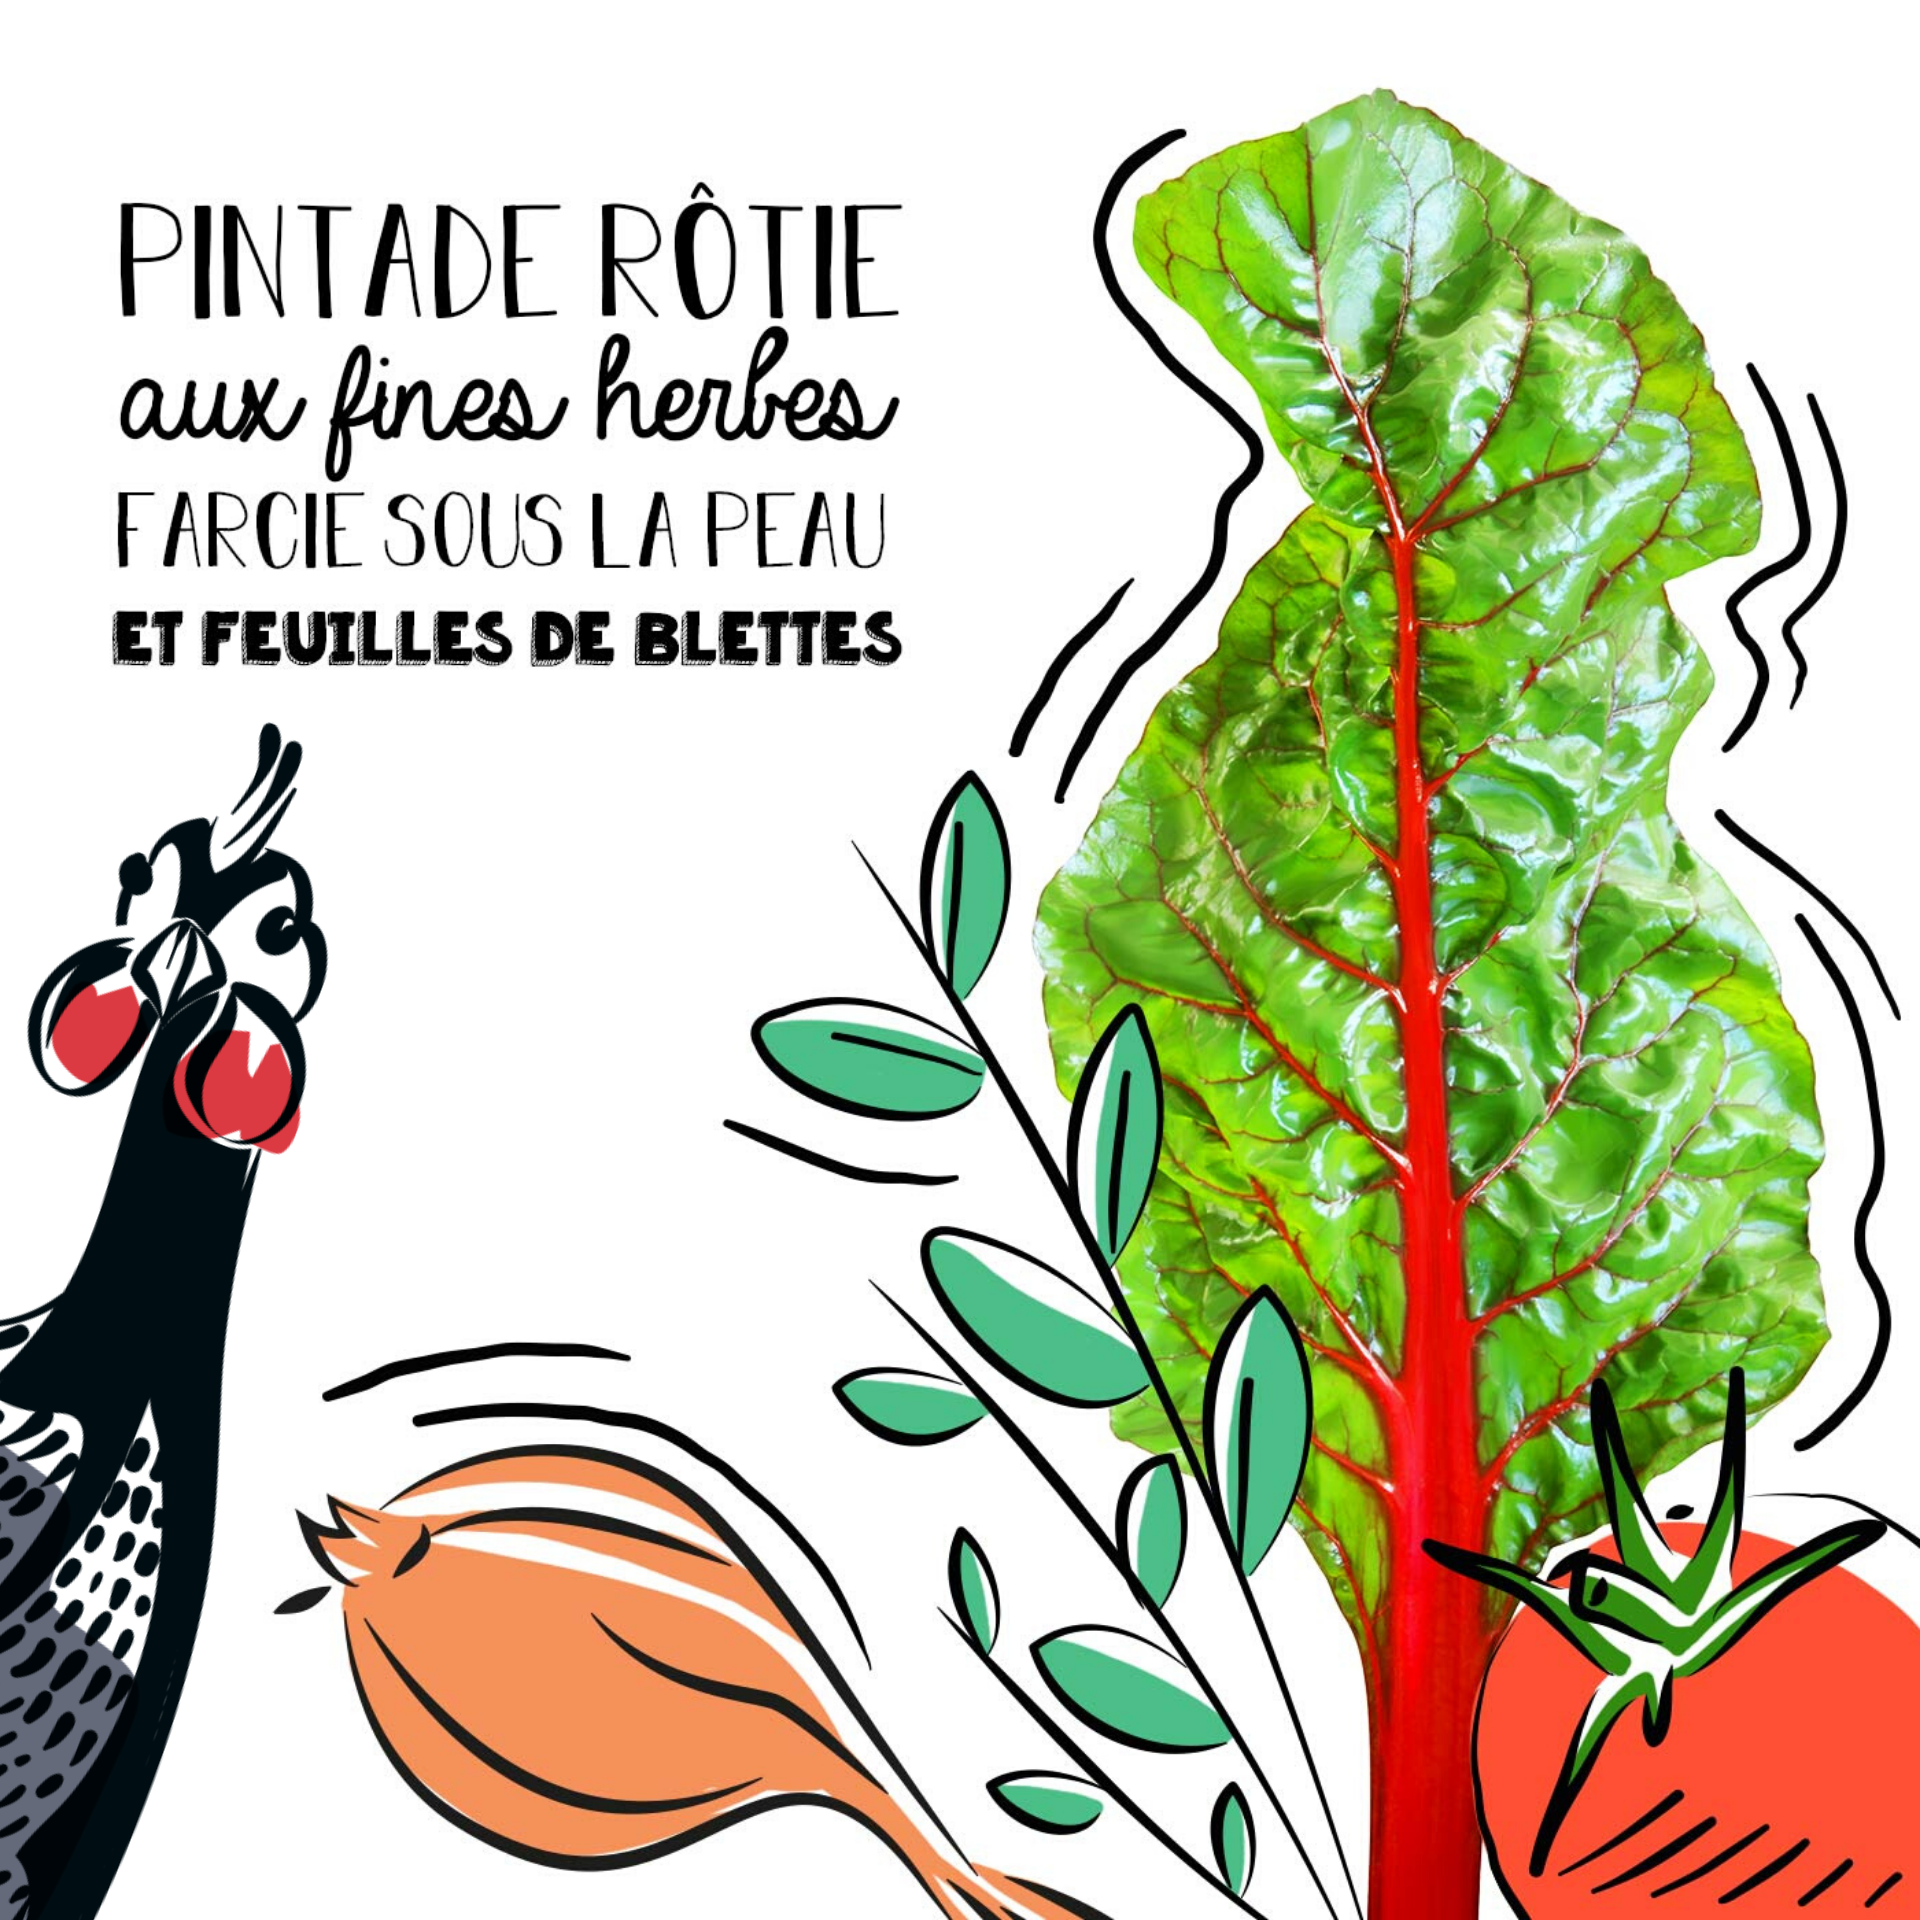 Recette gagnant 2019 - Pintade aux fines herbes